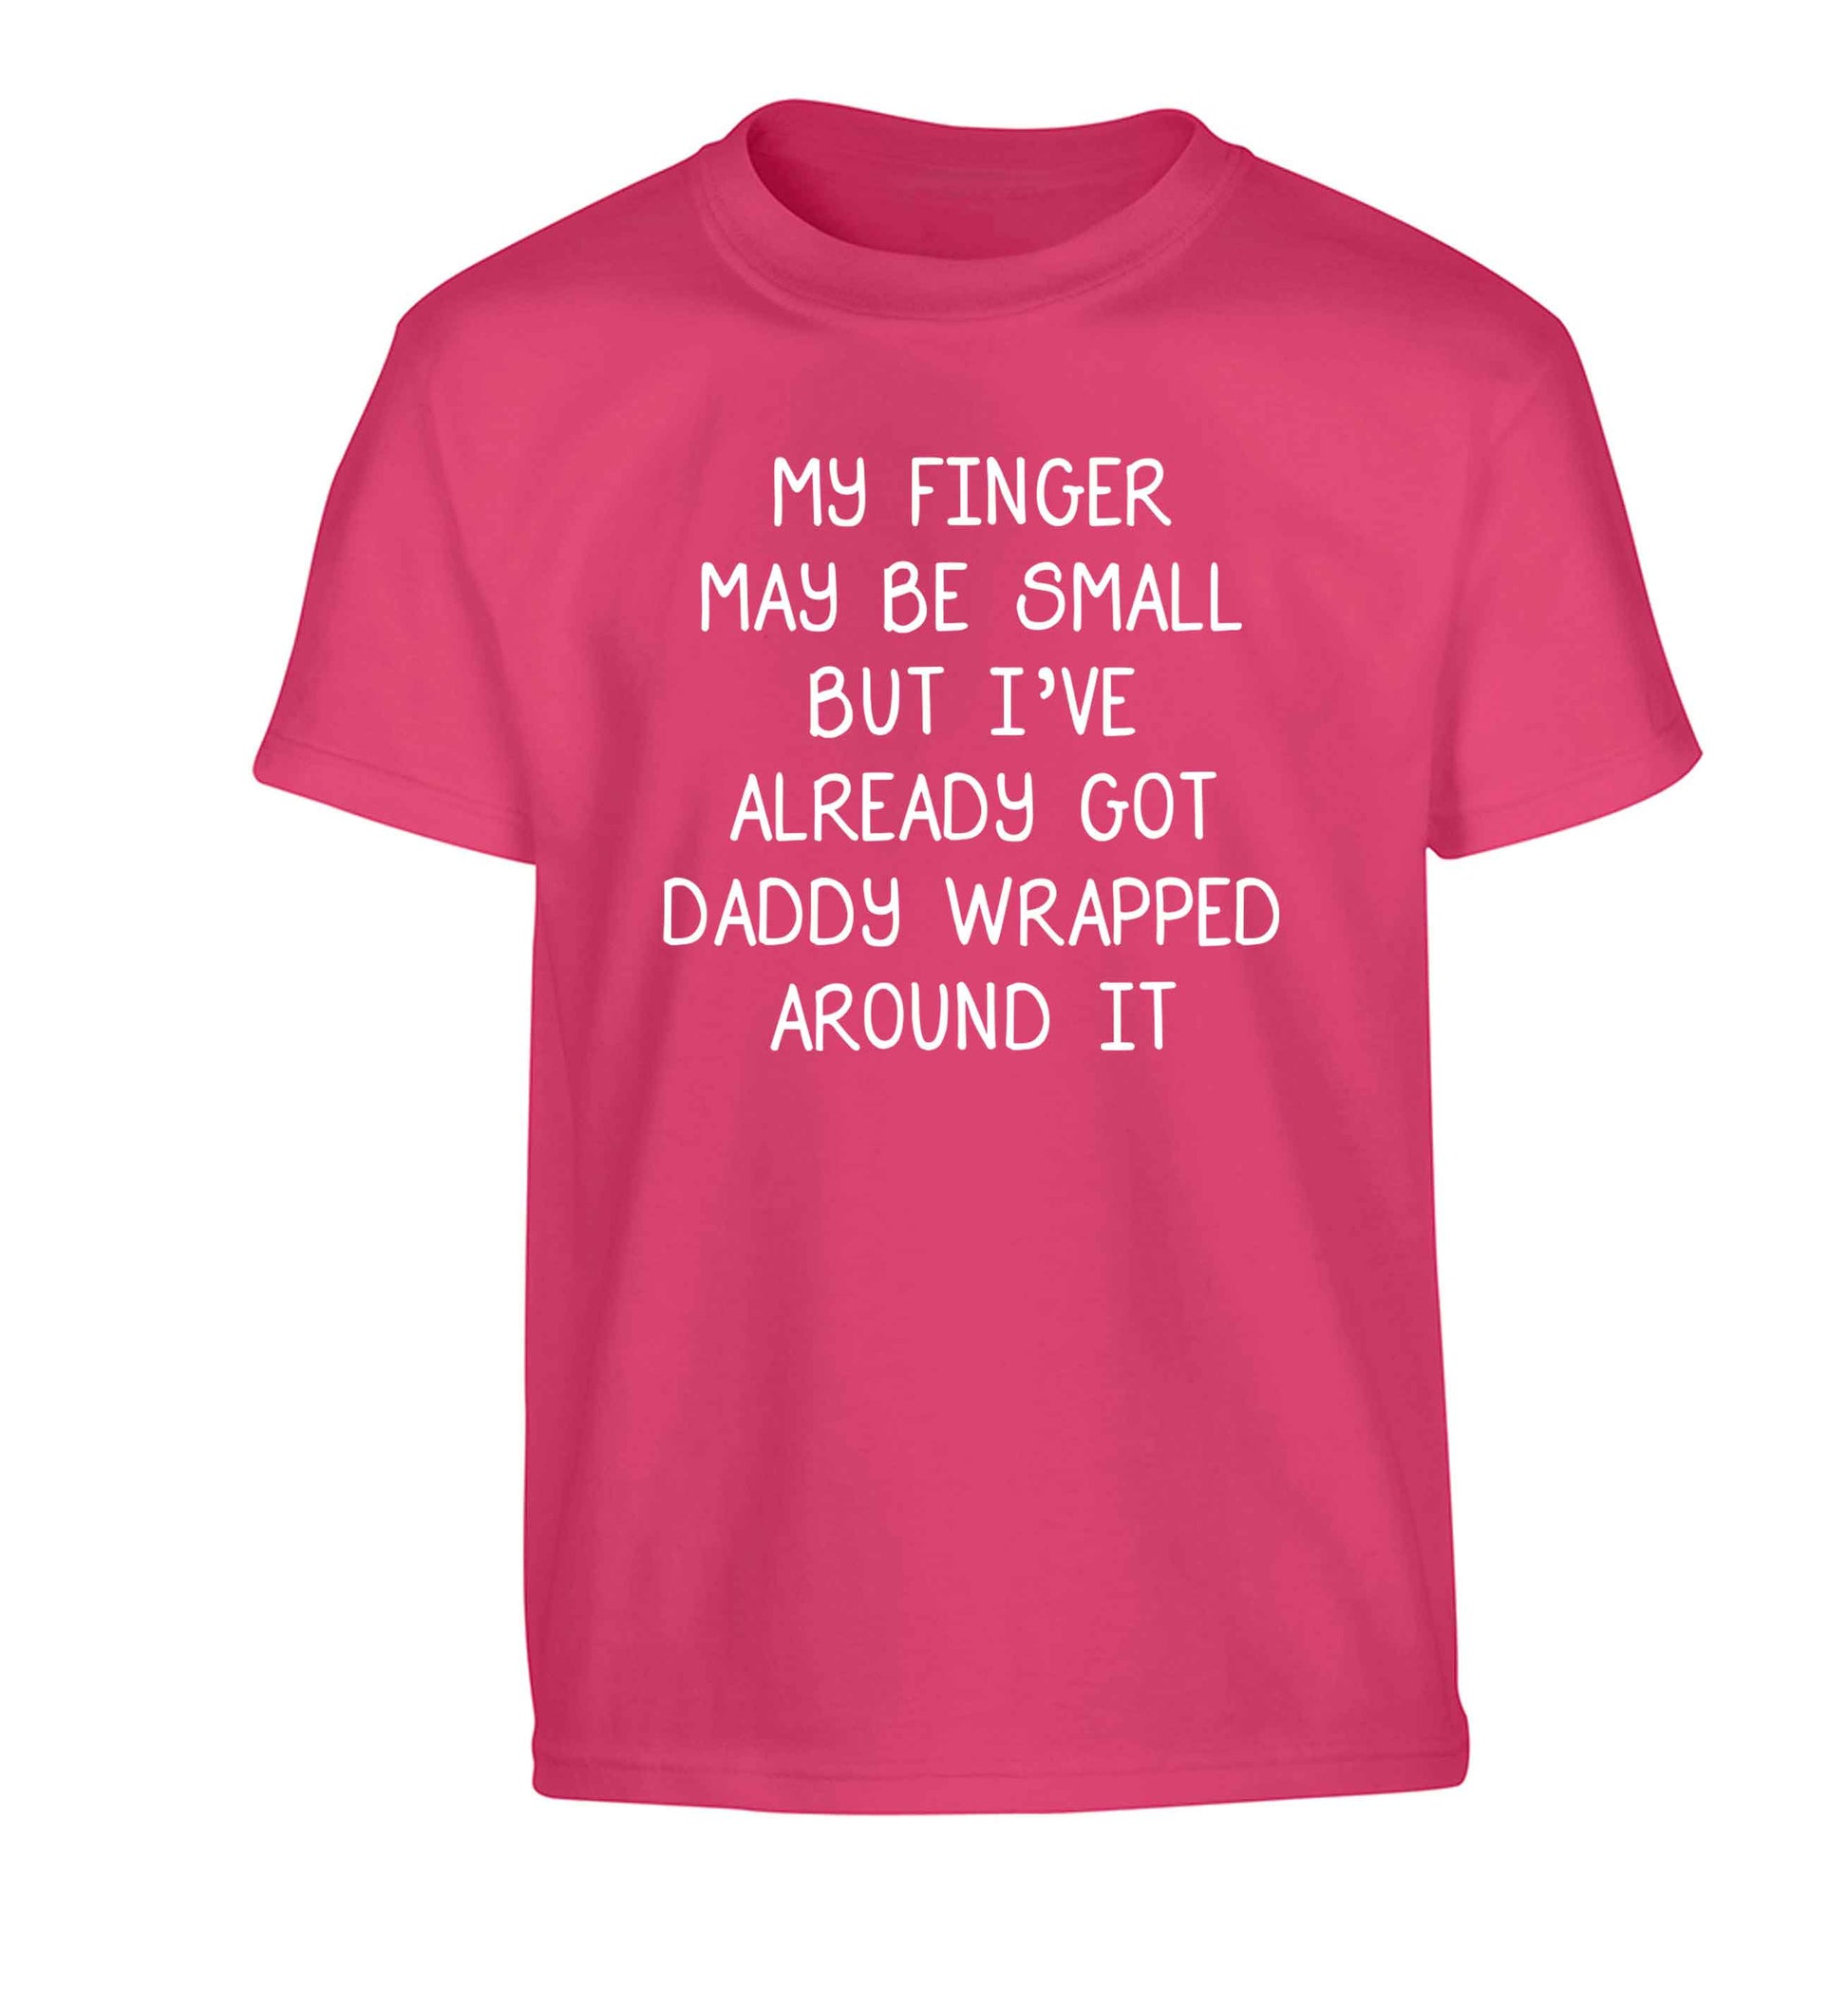 My finger may be small but I've already got daddy wrapped around it Children's pink Tshirt 12-13 Years